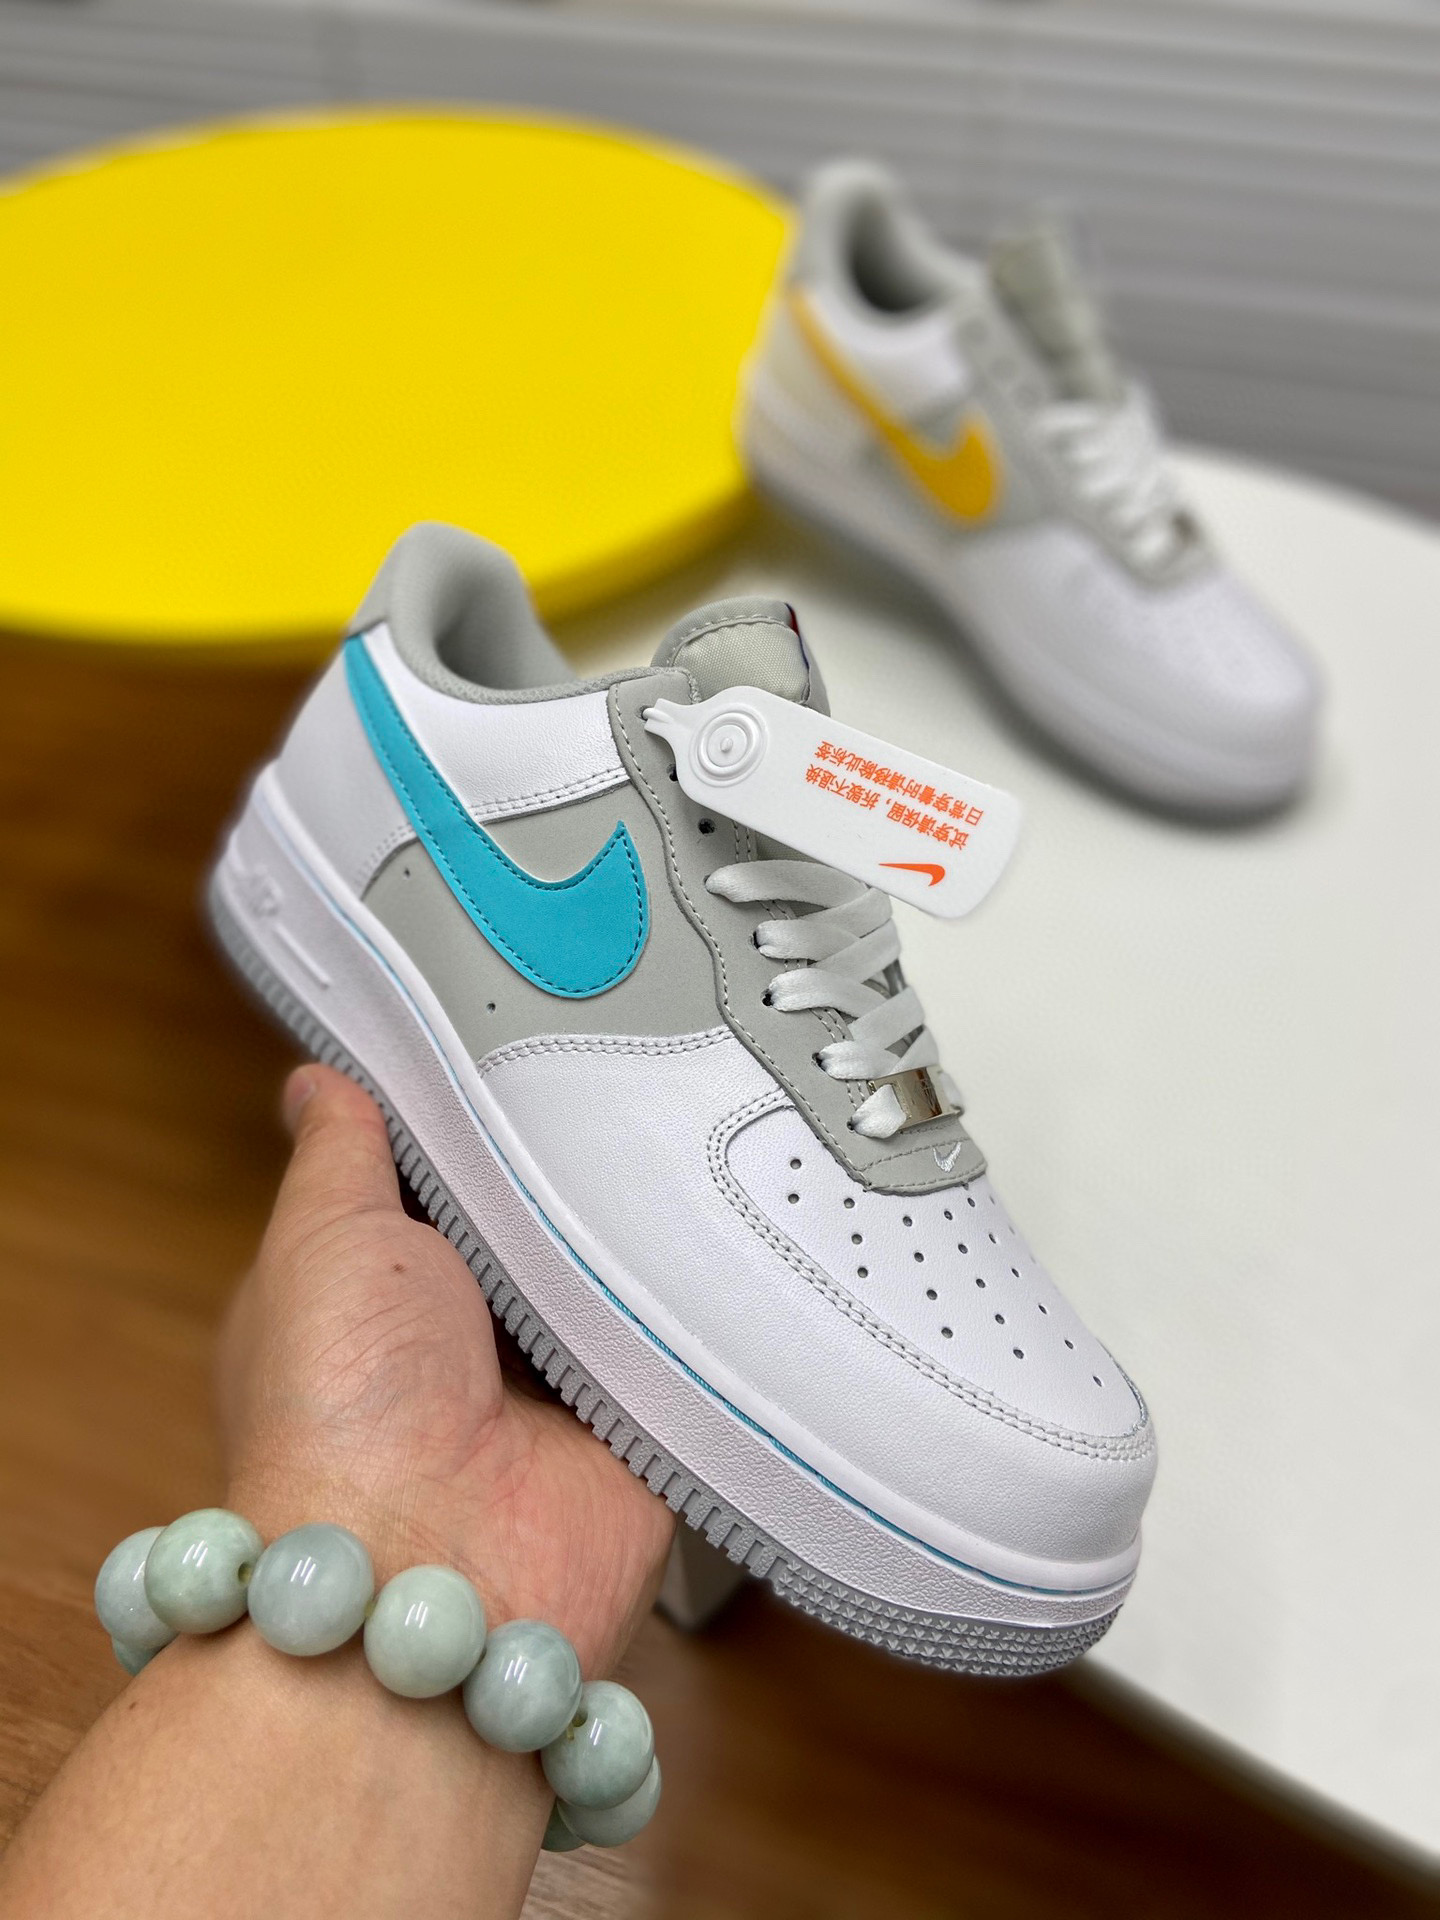 Nike Air Force One Sneakers Unisex # 275061, cheap Air Force one, only $89!